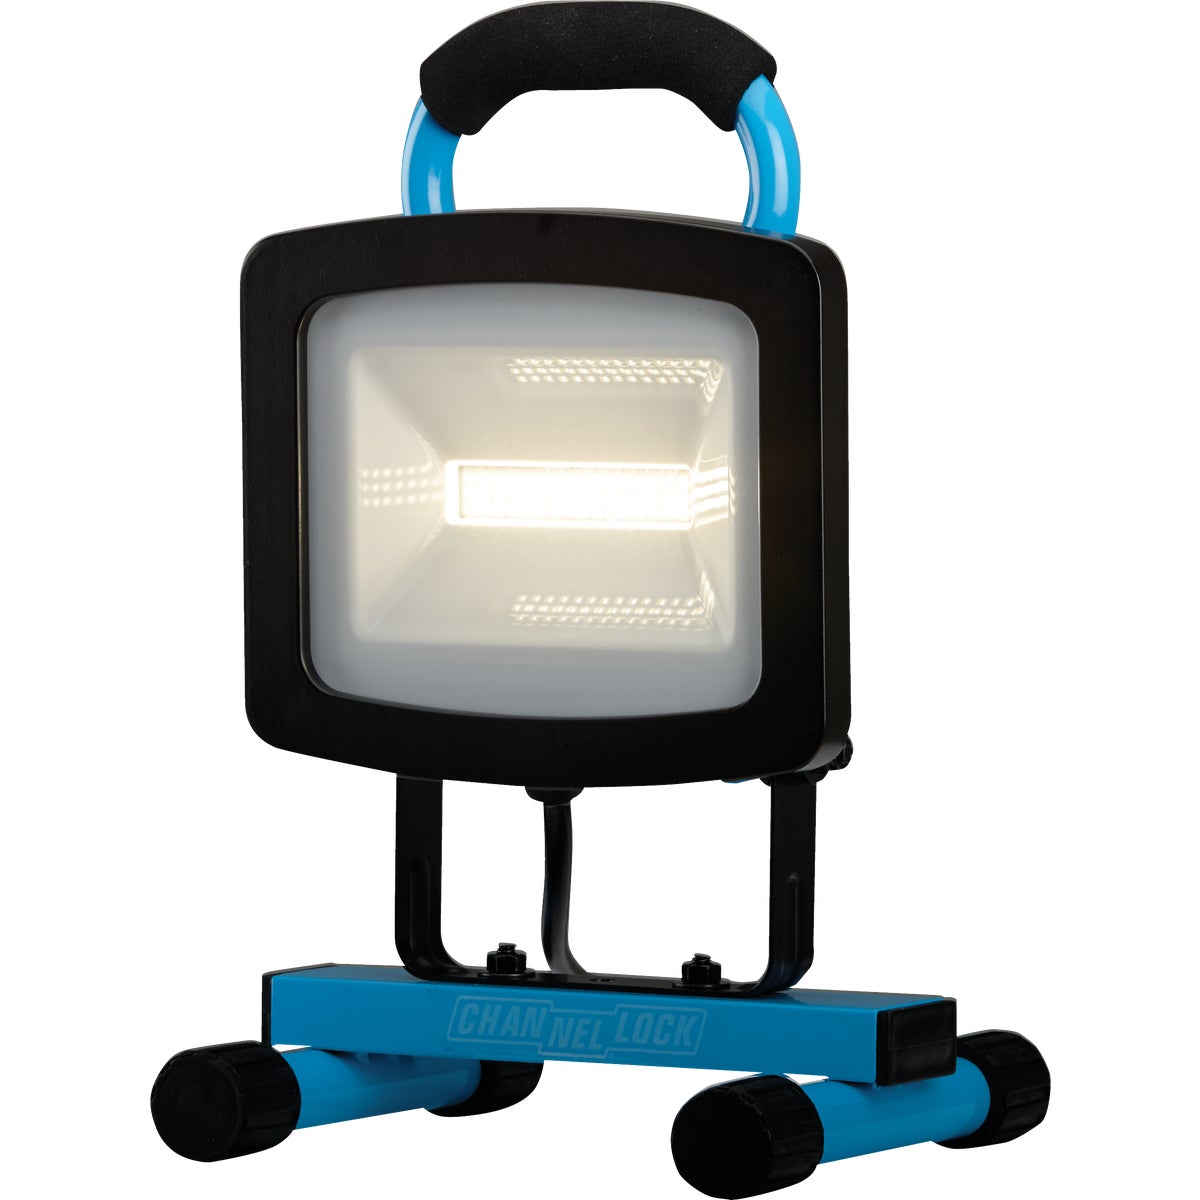 Channellock 3500 Lm. LED H-Stand Portable Work Light